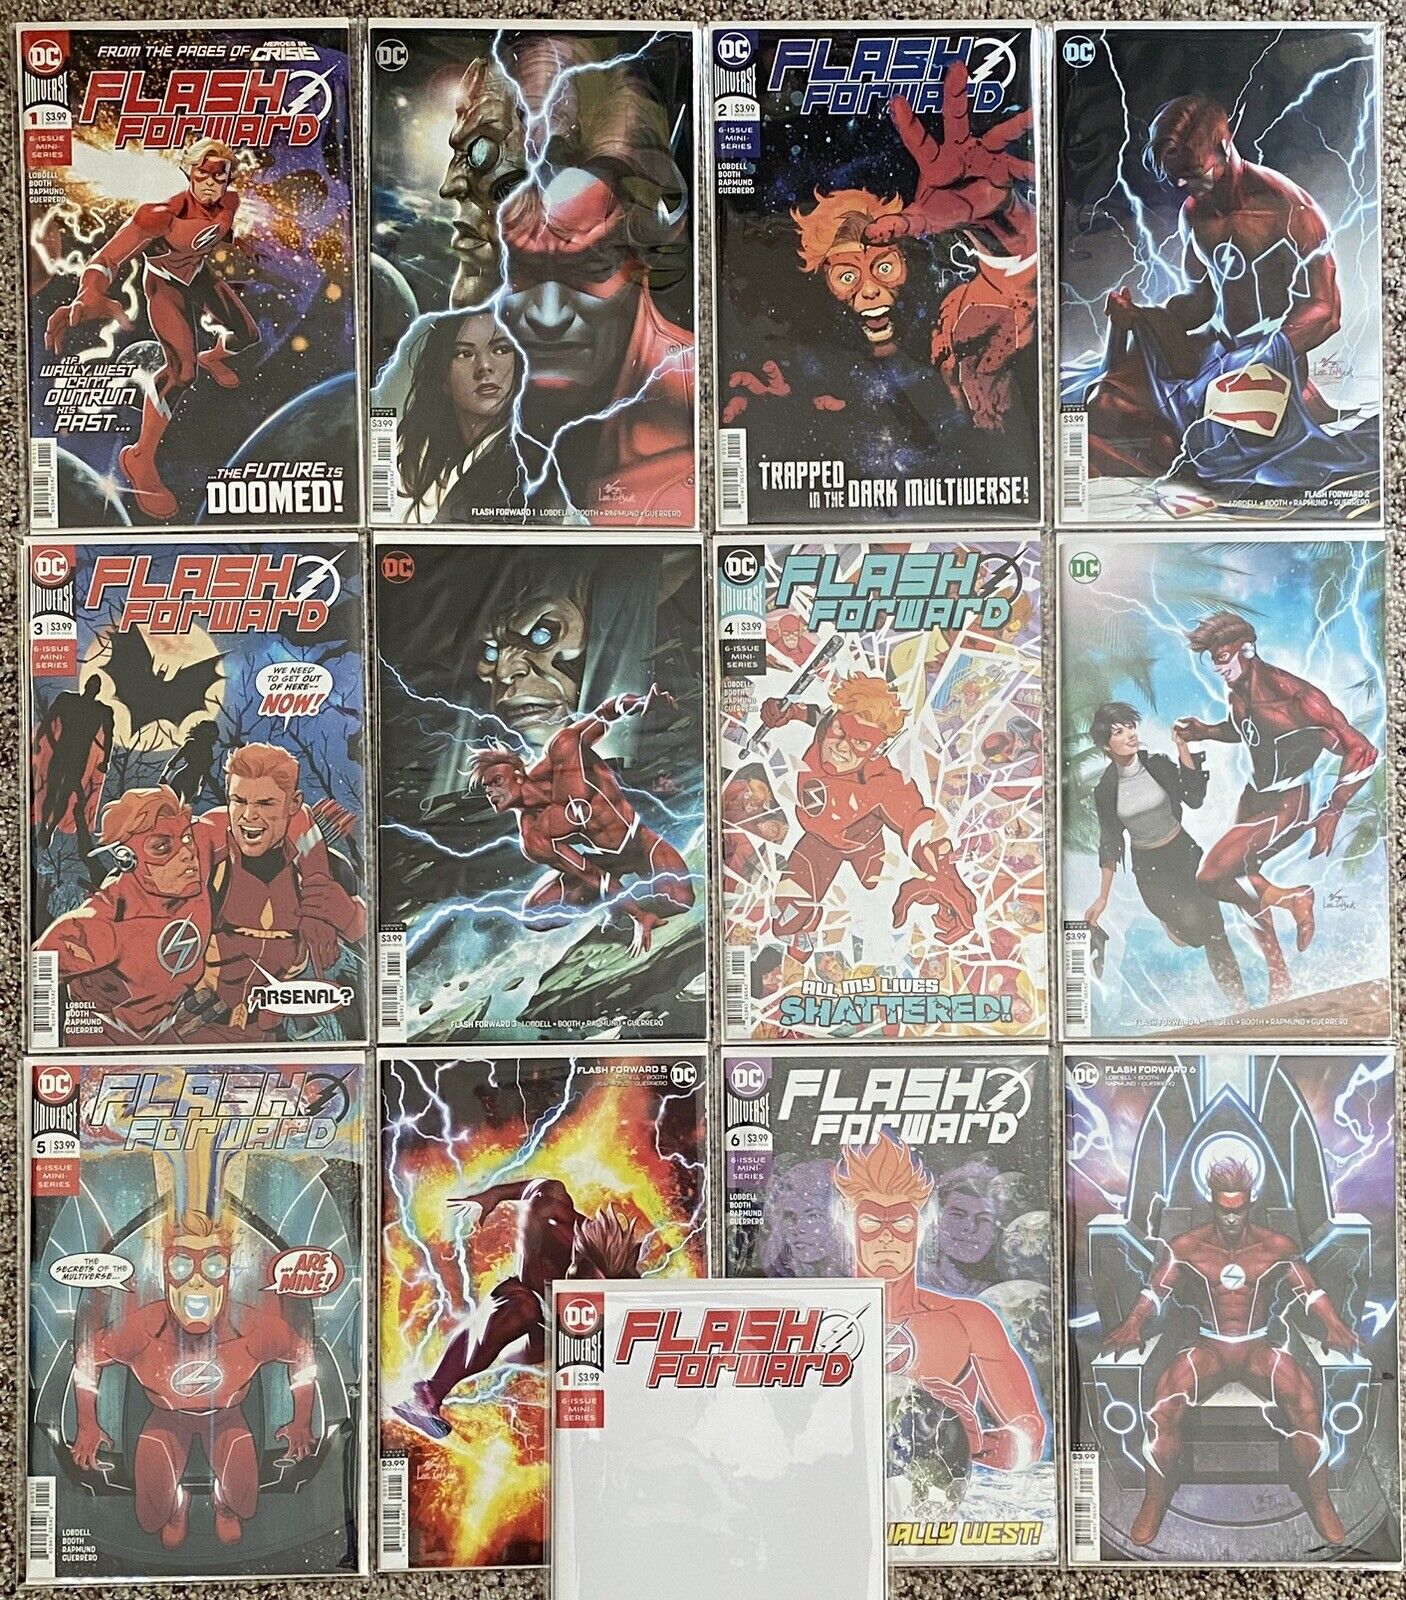 Flash Forward #1-6 With Variants - NM 1st Prints - Complete Set Of All 13 Covers